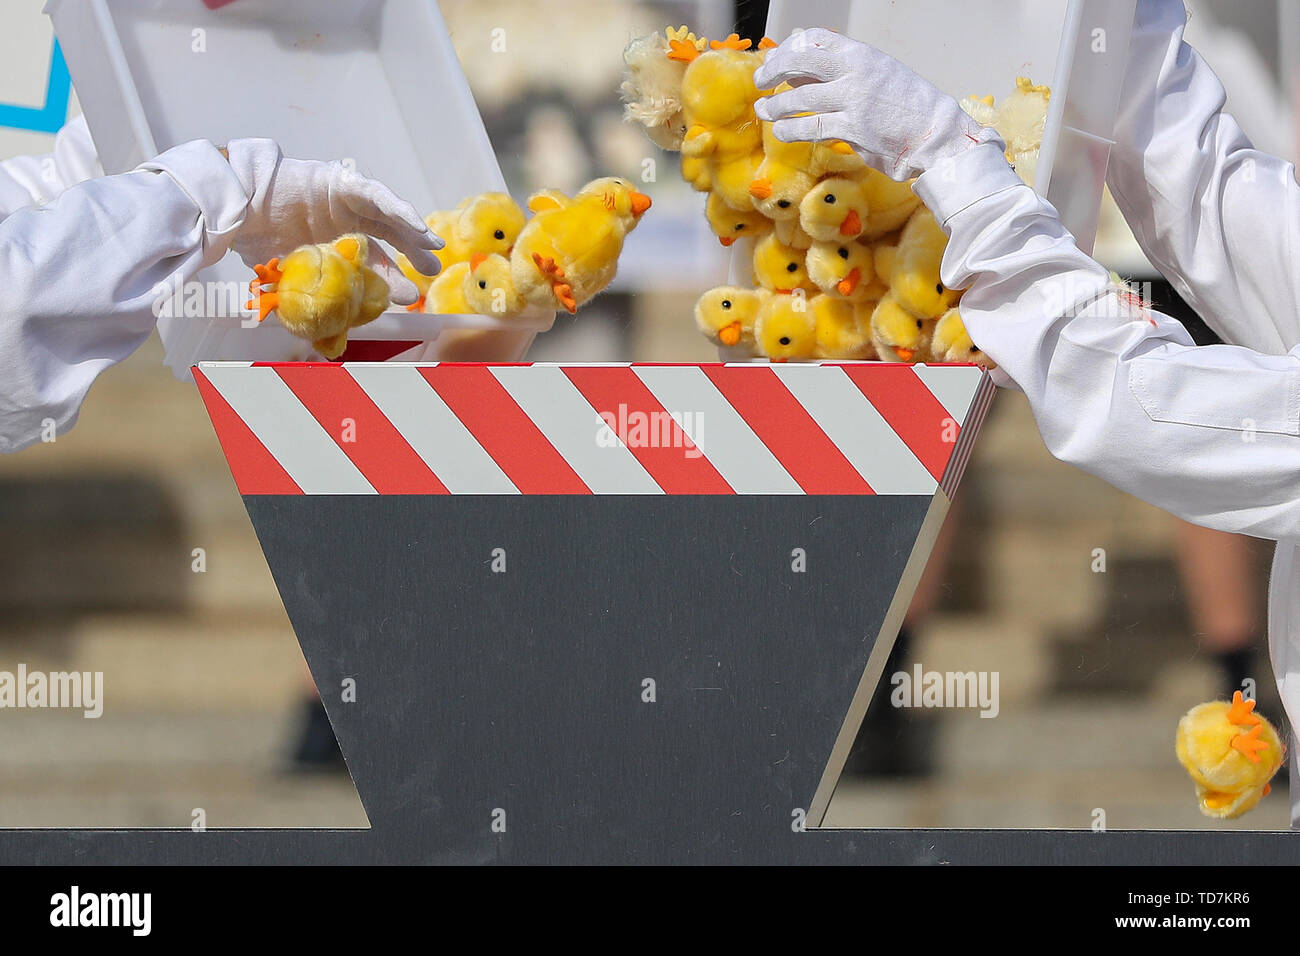 Leipzig, Germany. 13th June, 2019. Members of the animal protection  organization Peta are protesting in front of the Federal Administrative  Court with a symbolic action on chick shredding before the judgement is